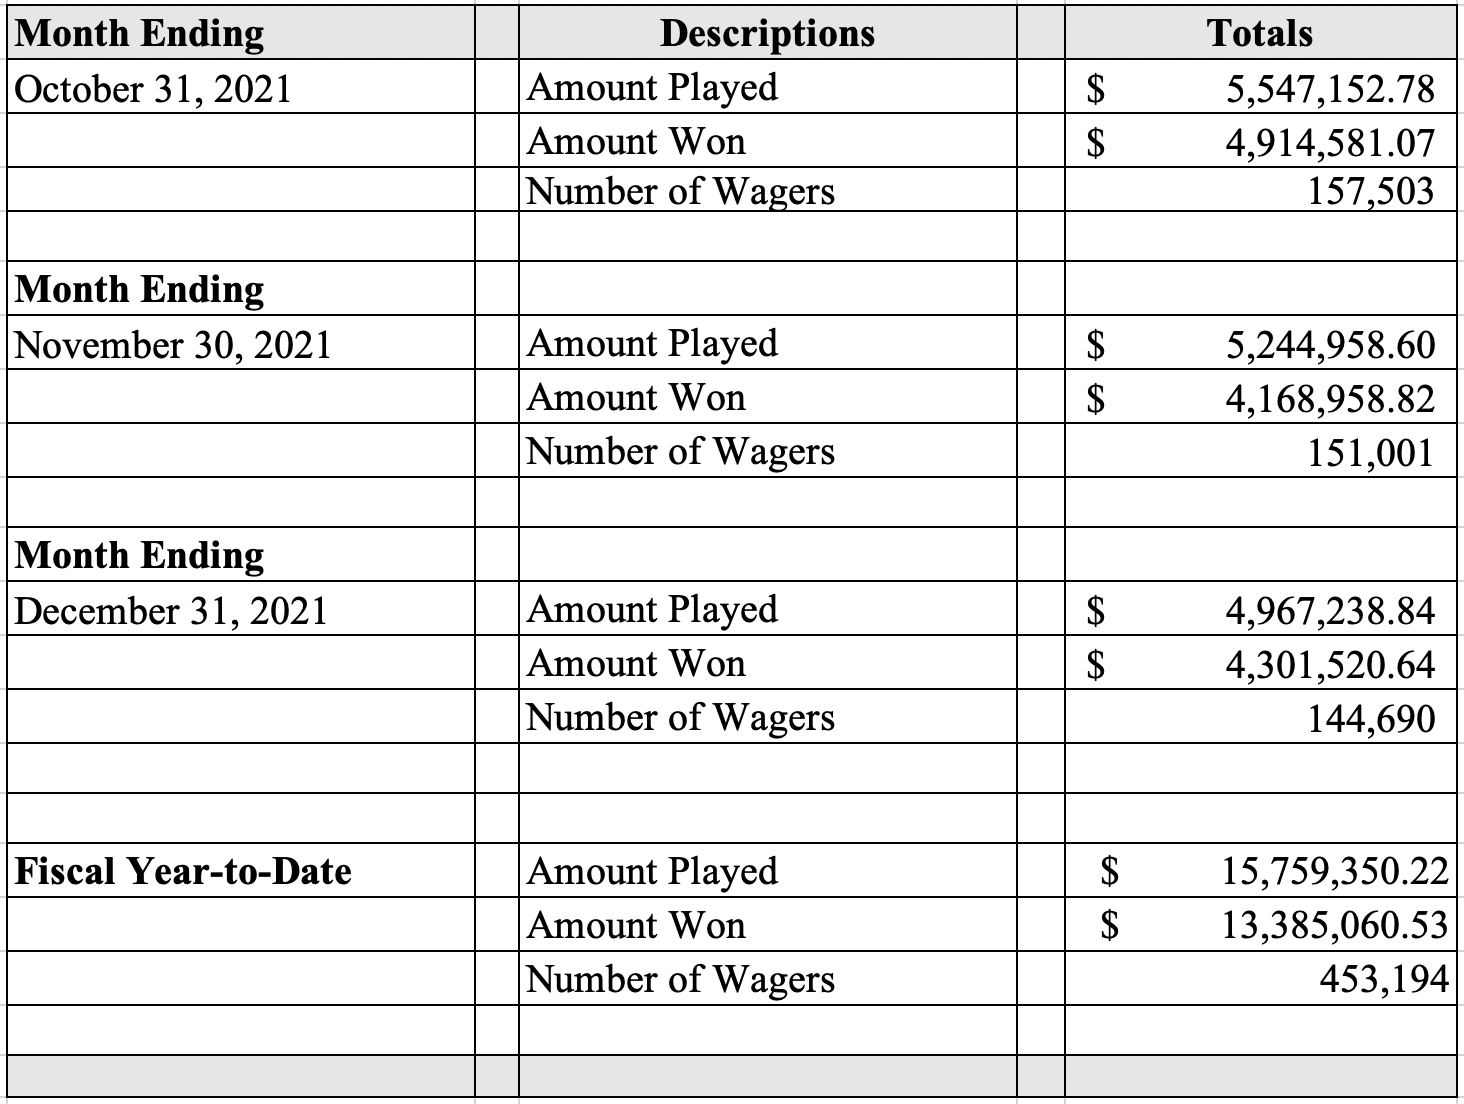 Table displaying the November 2021 Sports Wagering monthly revenue totals